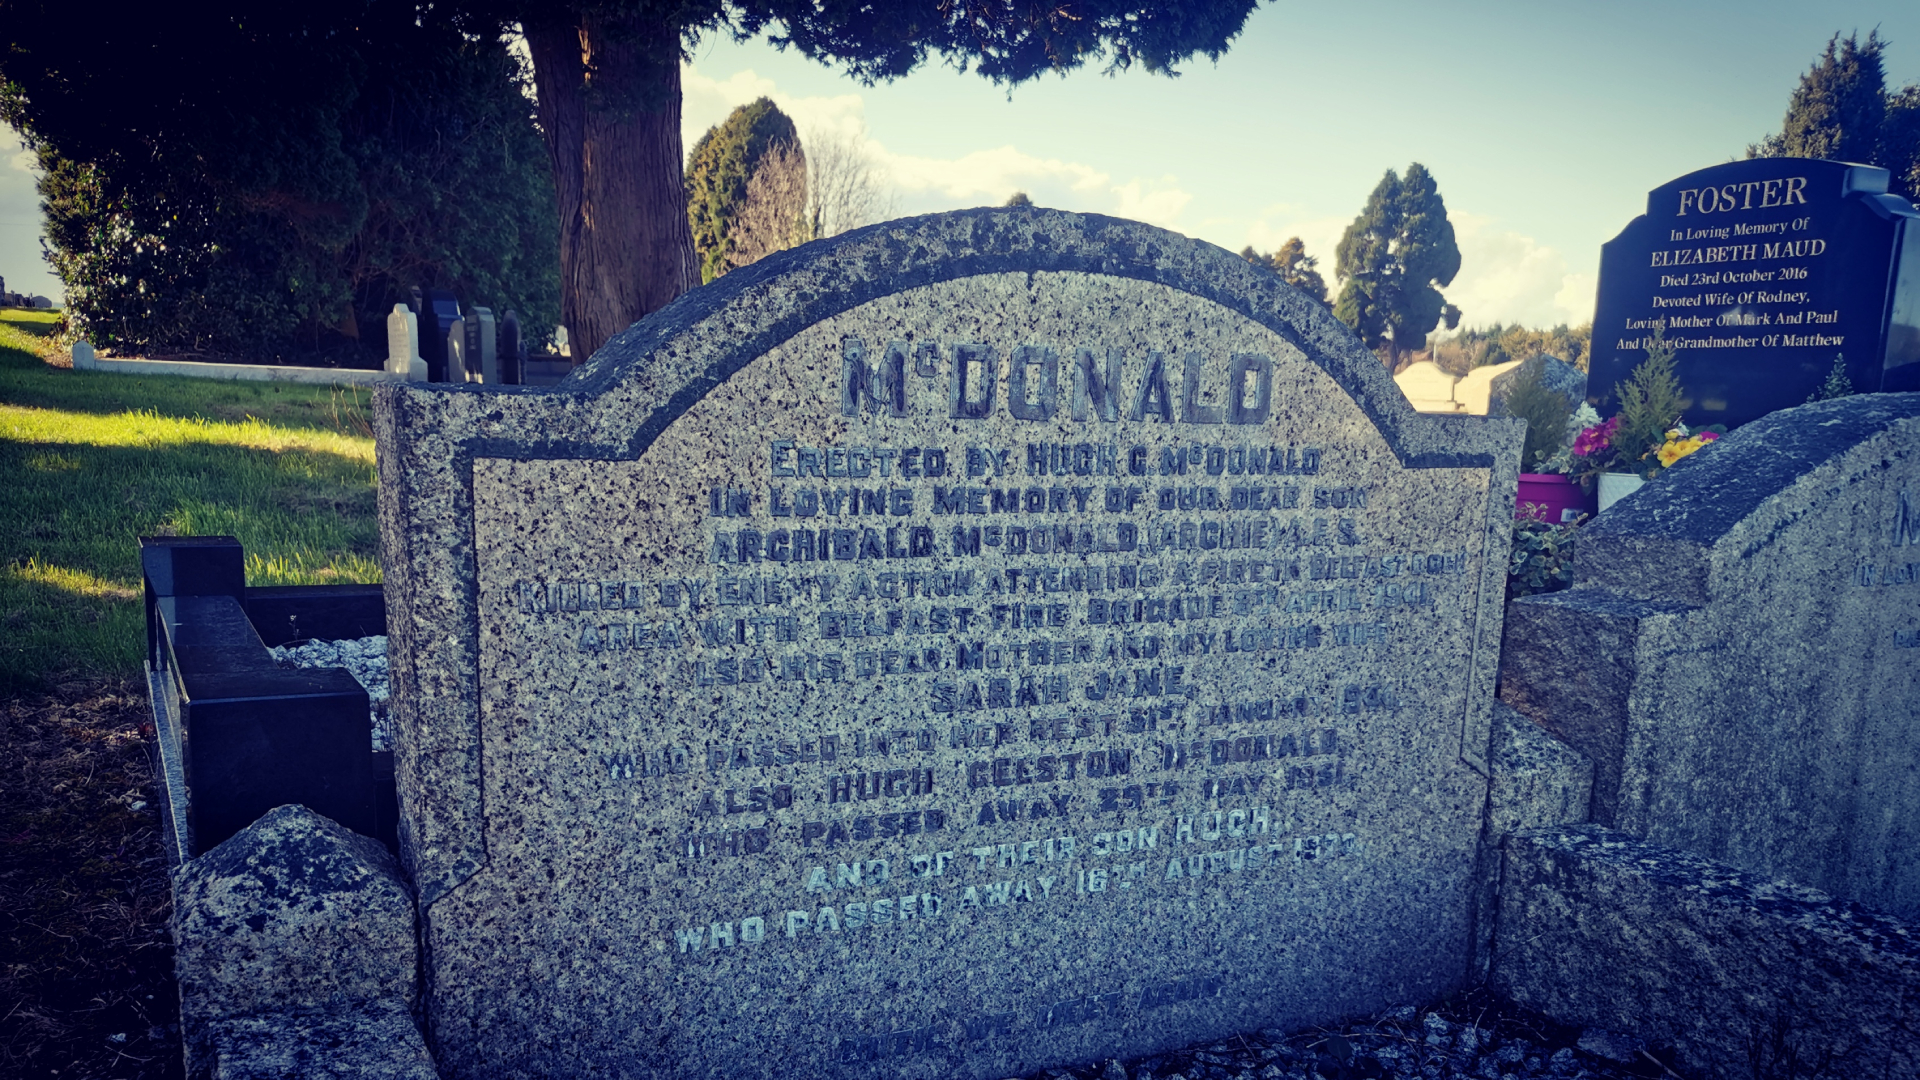 Grave of Auxiliary Fire Service volunteer Archibald McDonald in Dundonald Cemetery, Dundonald, Co. Down.